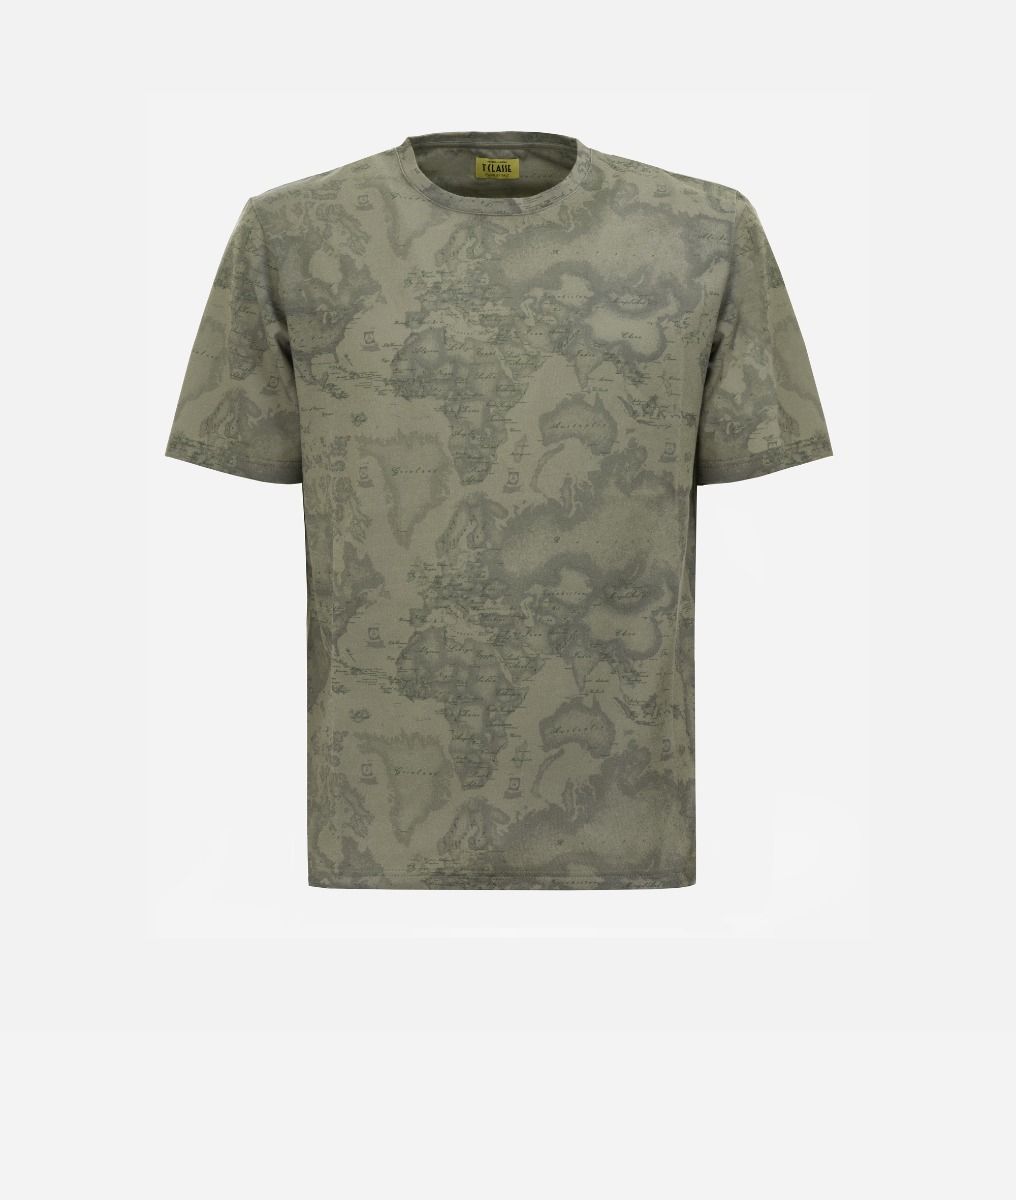 Short-sleeves t-shirt with all-over printed map Military Green,front